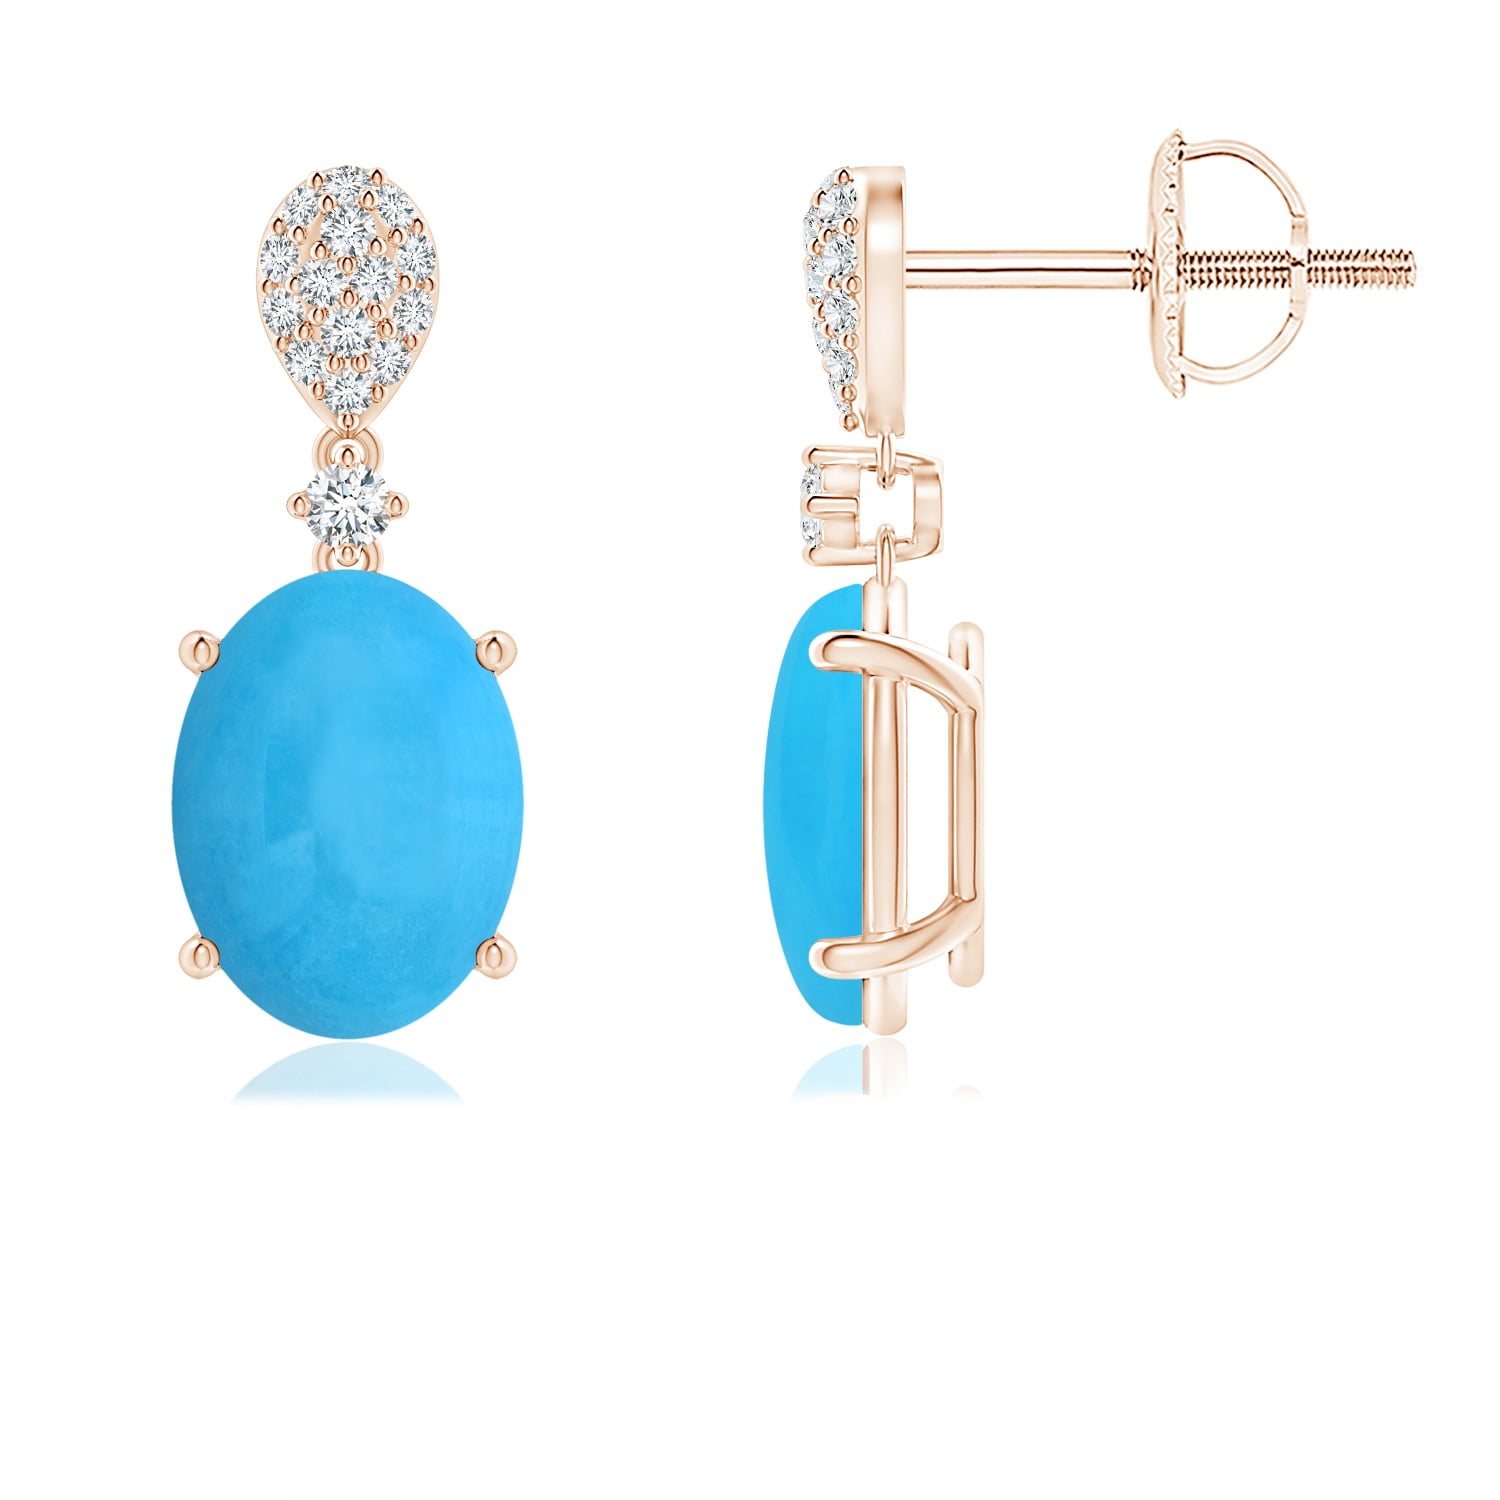 Details about   Turquoise Gemstone Anniversary Jewelry 14k Rose Gold Earrings